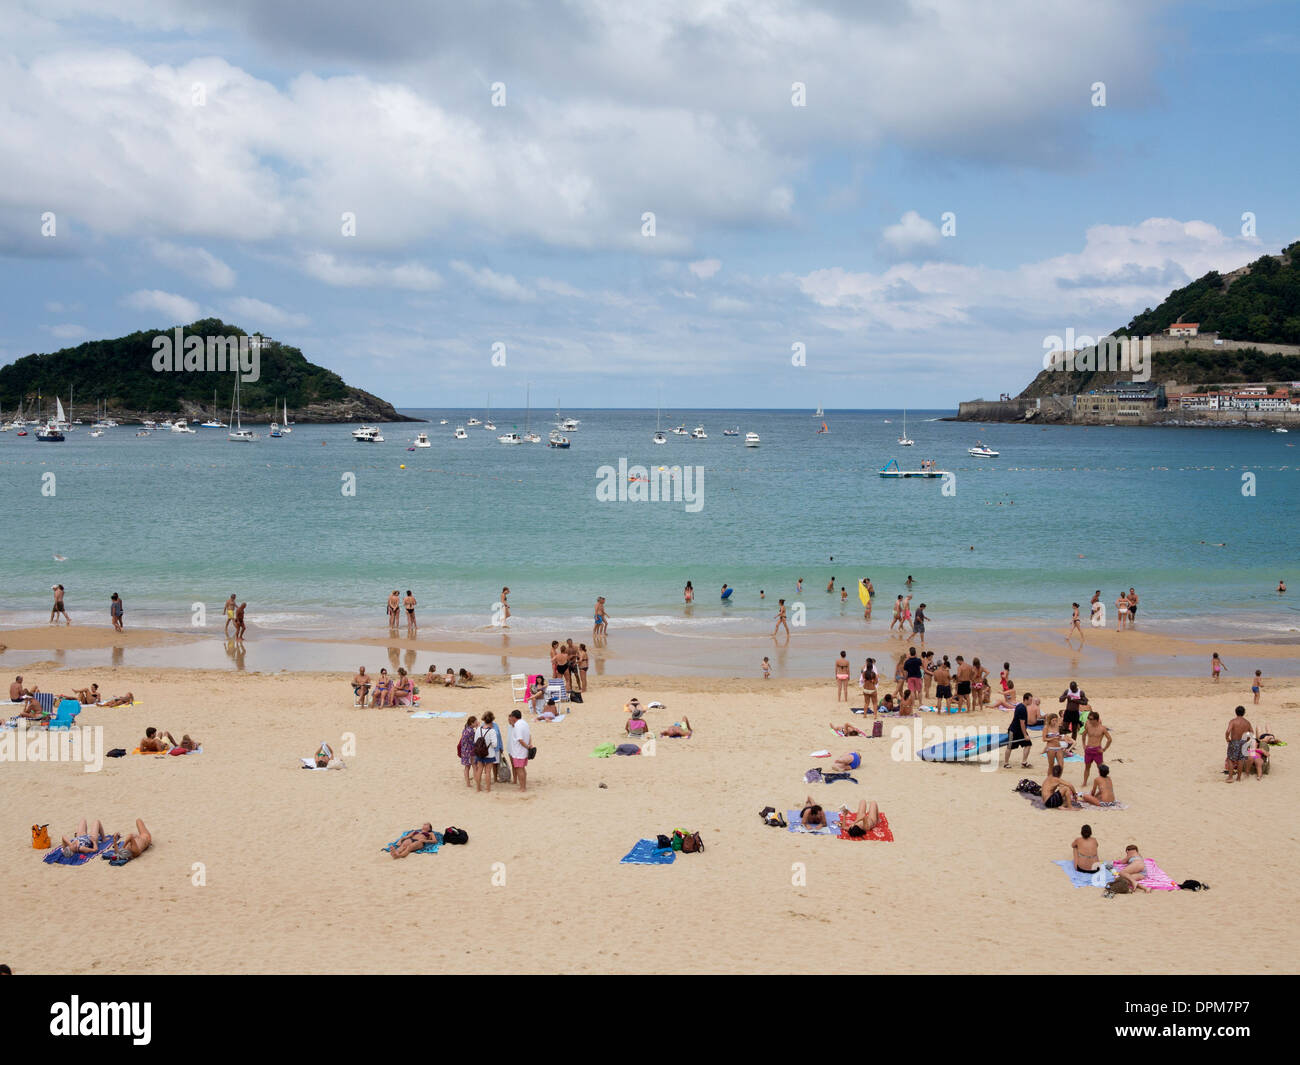 Families, swimmers and sunbathers relaxing on a sunny day on La Concha beach in San Sebastian (Donostia), Basque Country, Spain Stock Photo